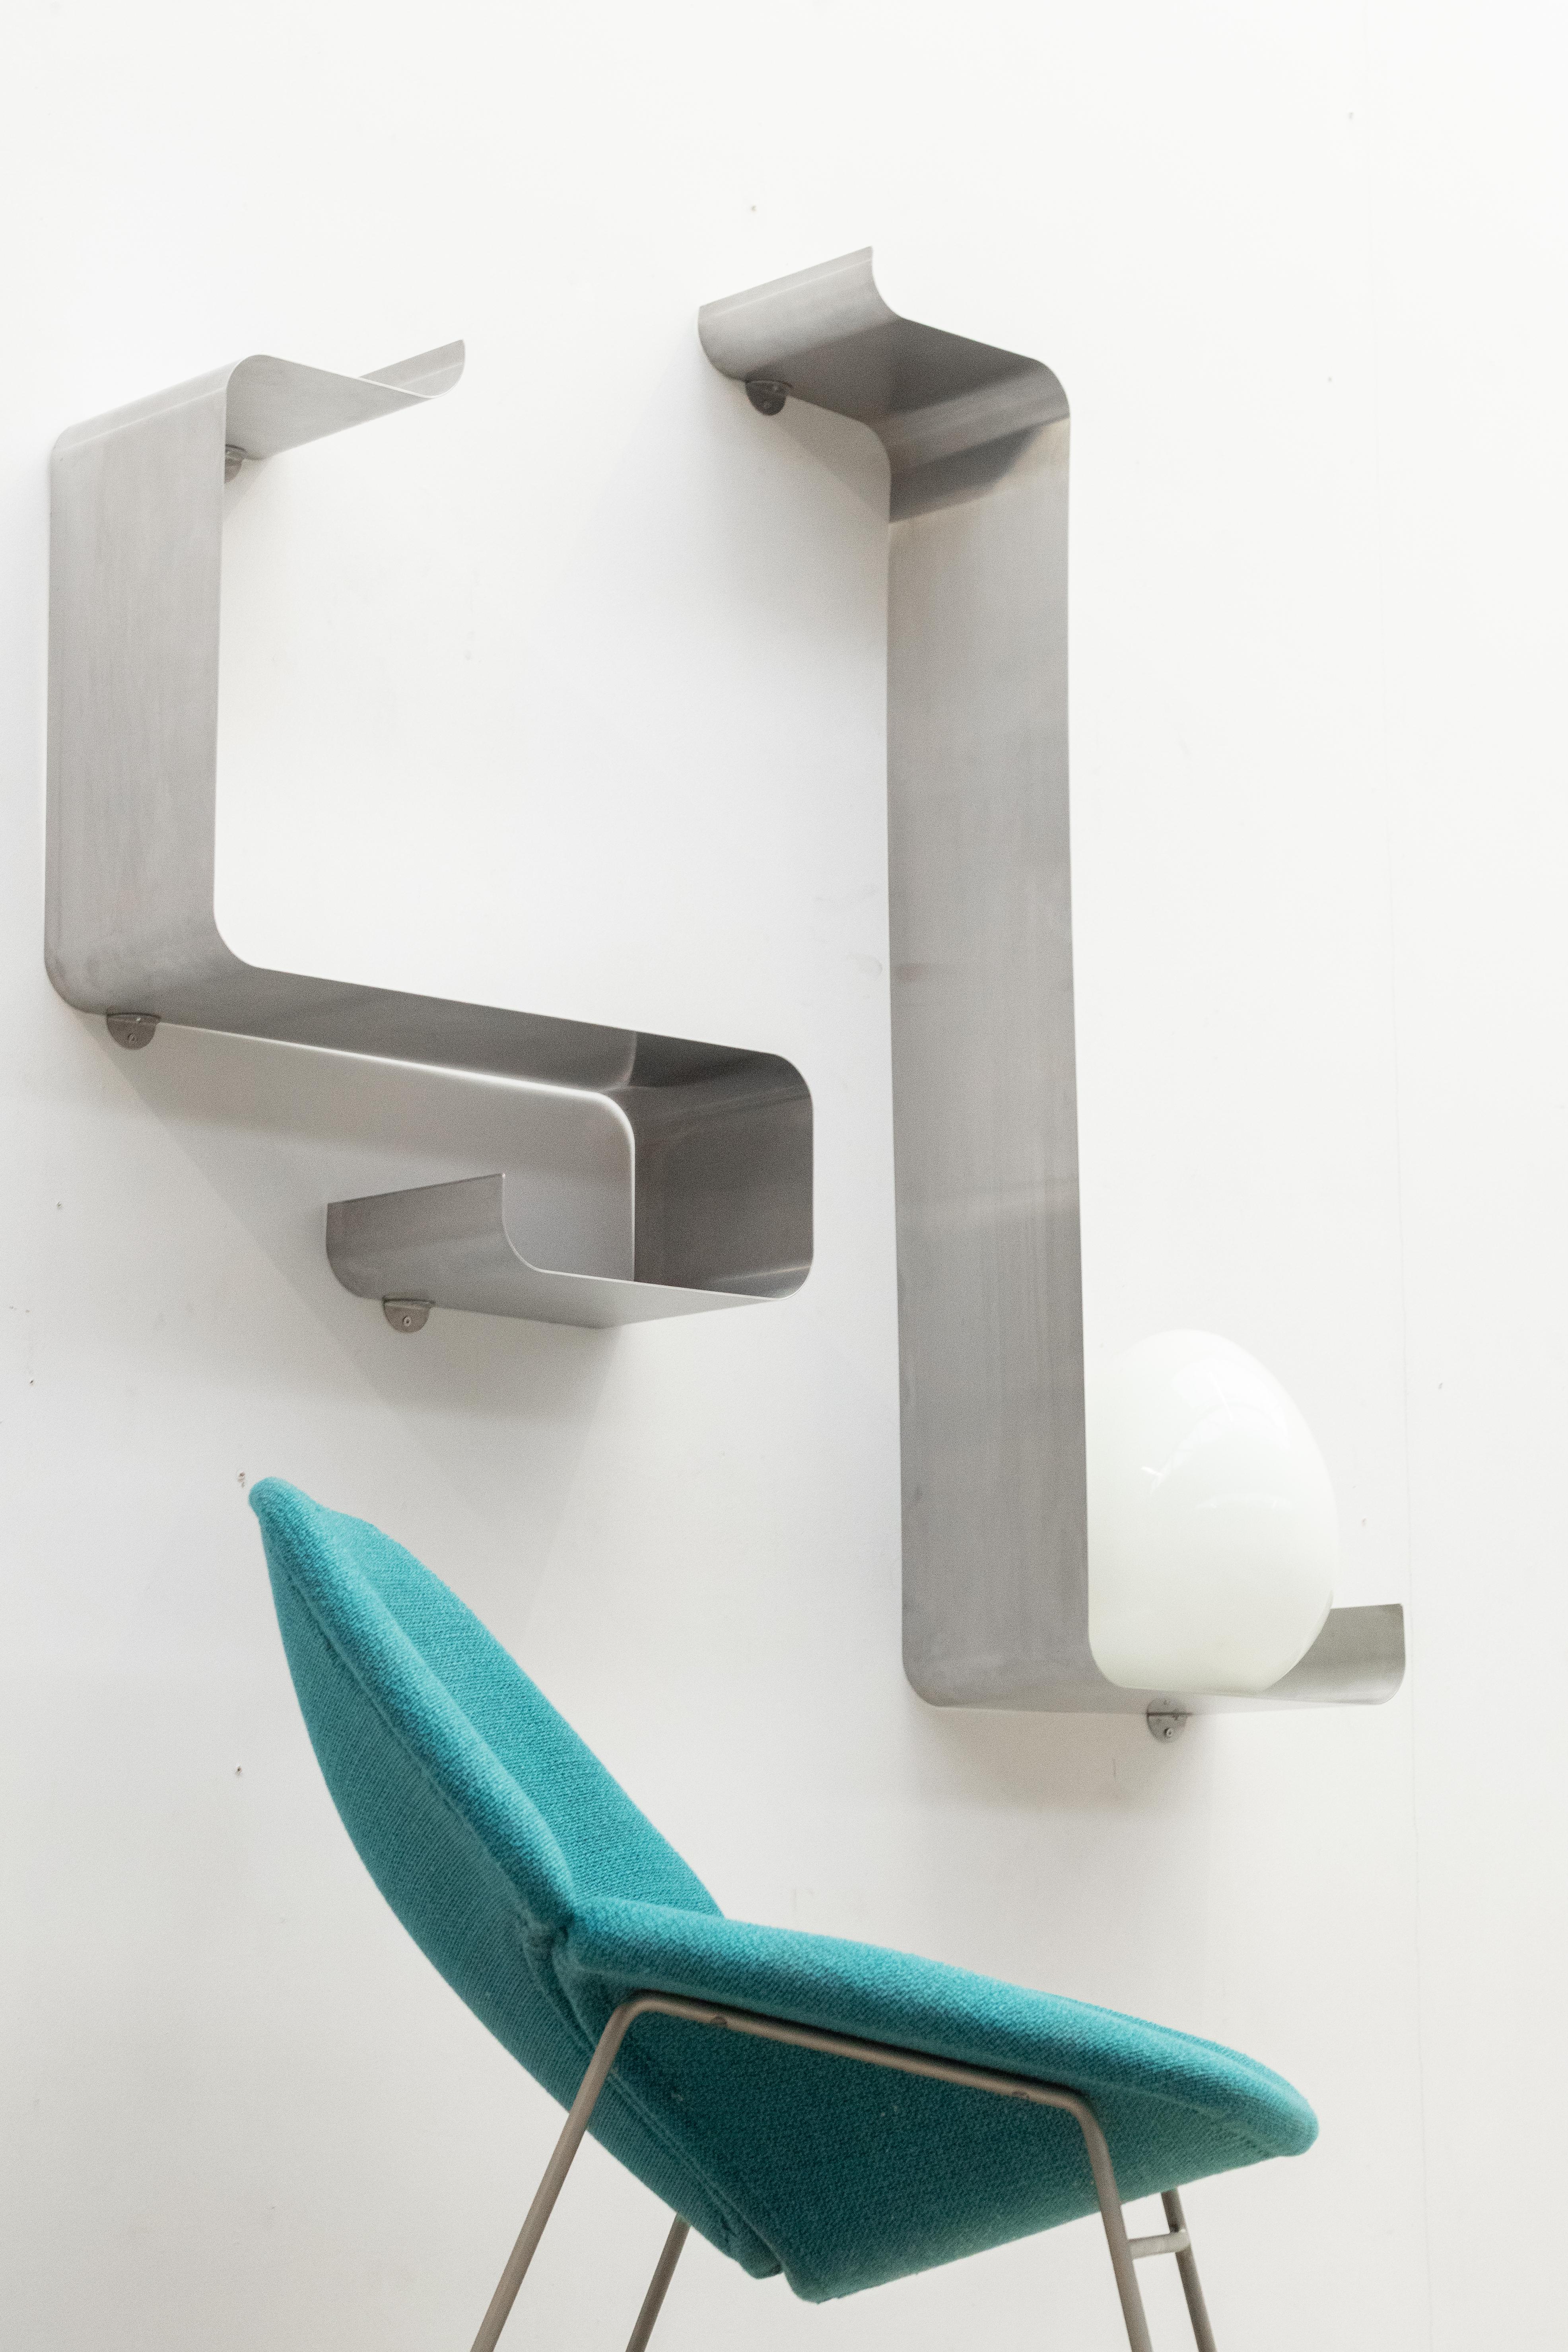 Space Age Pairs of shelves by François Monnet and Joëlle Ferlande for Kappa.  For Sale